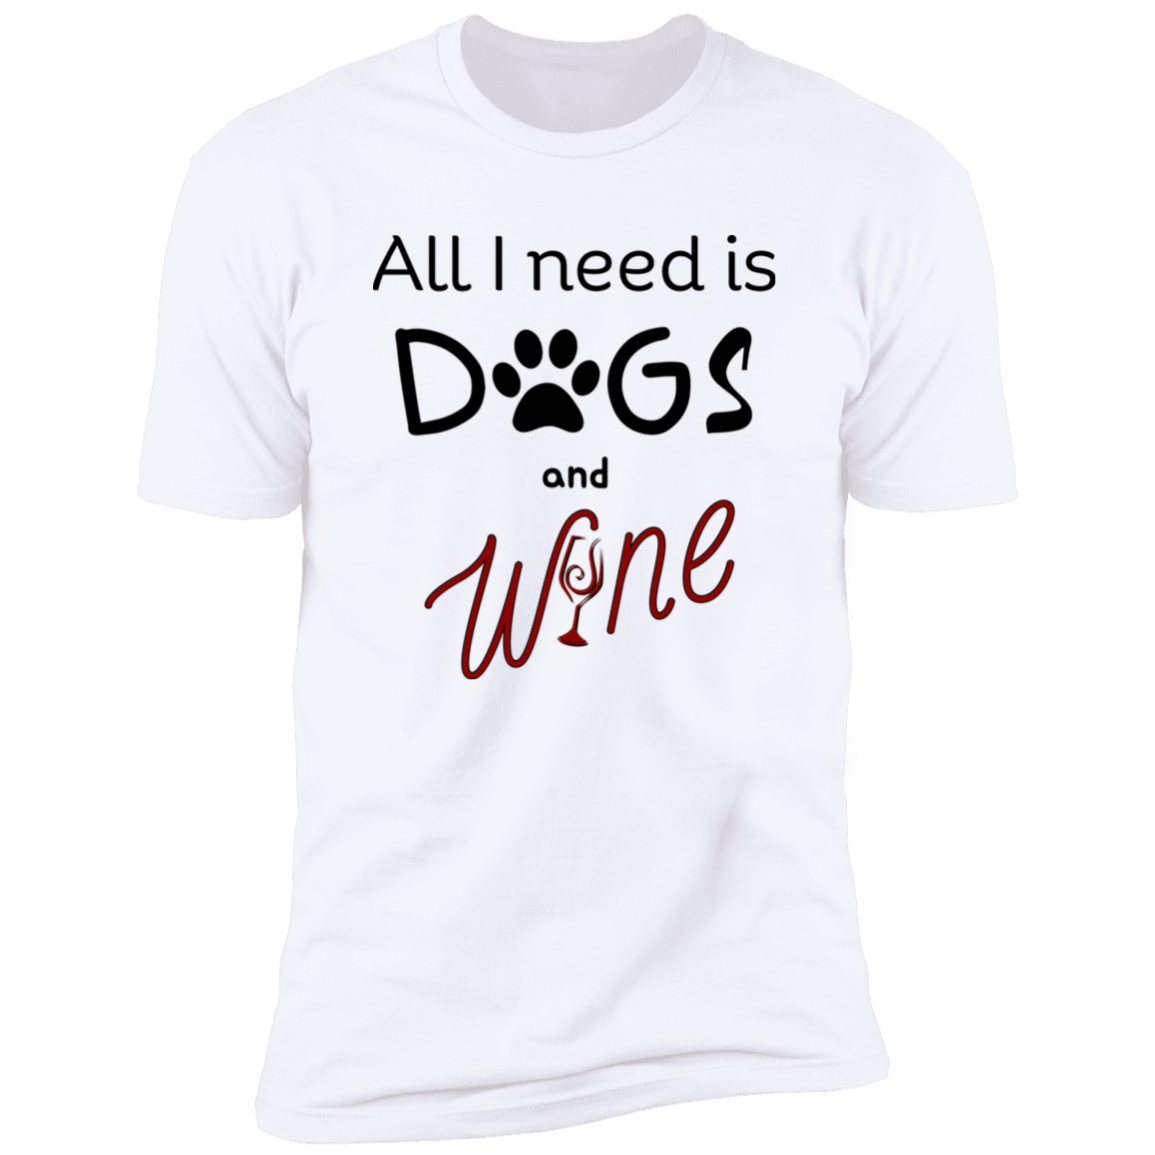 All I Need is Dogs and Wine T-shirt, Dog Shirt for humans, in white